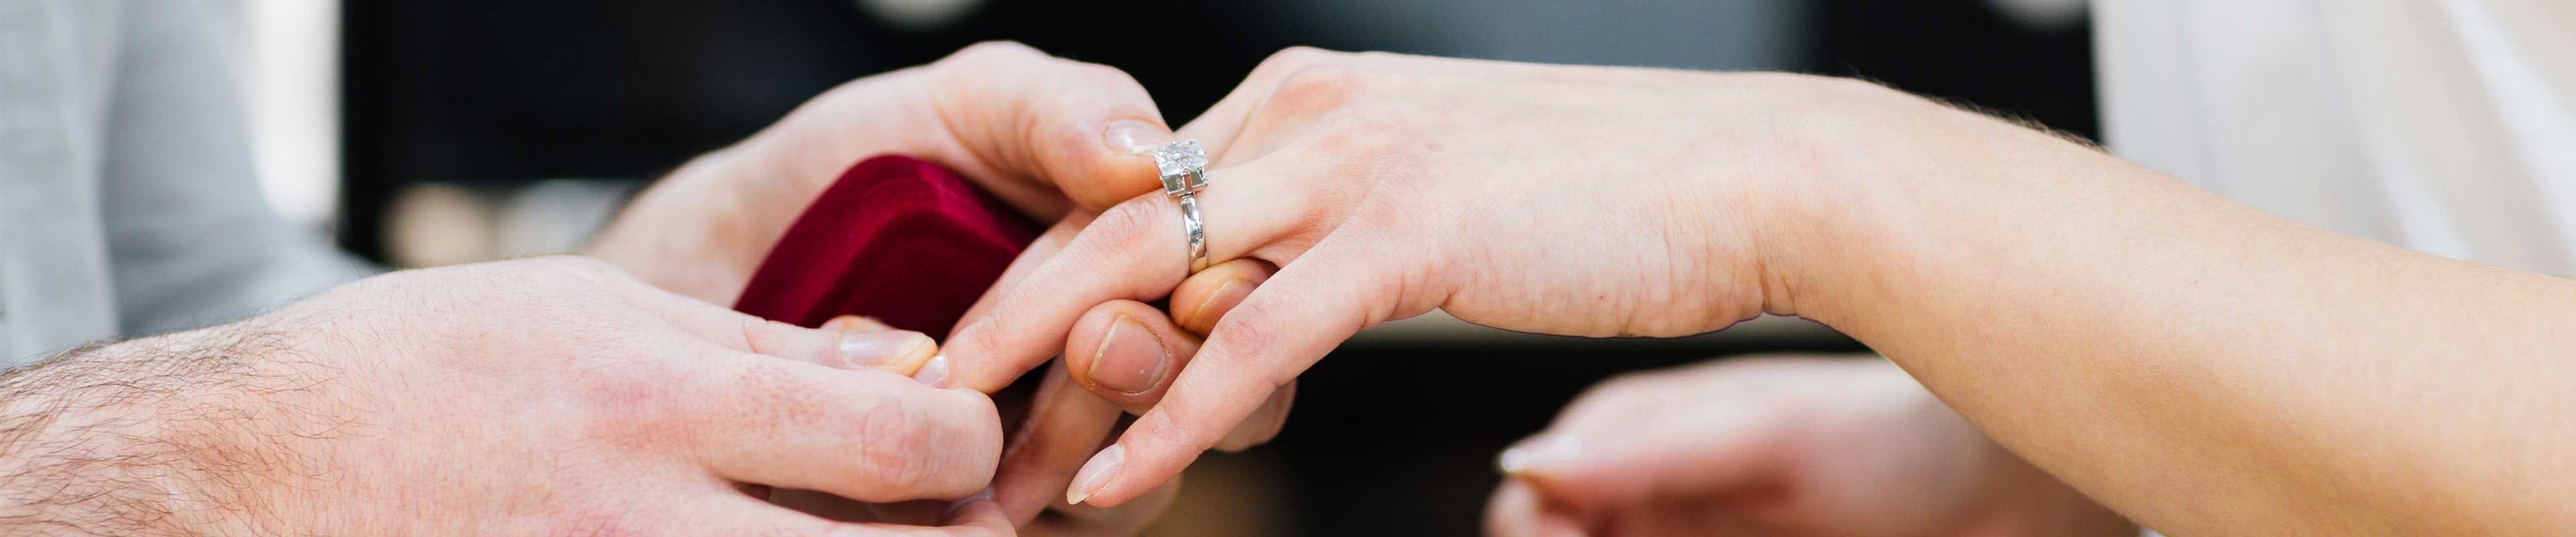 Putting engagement ring on finger